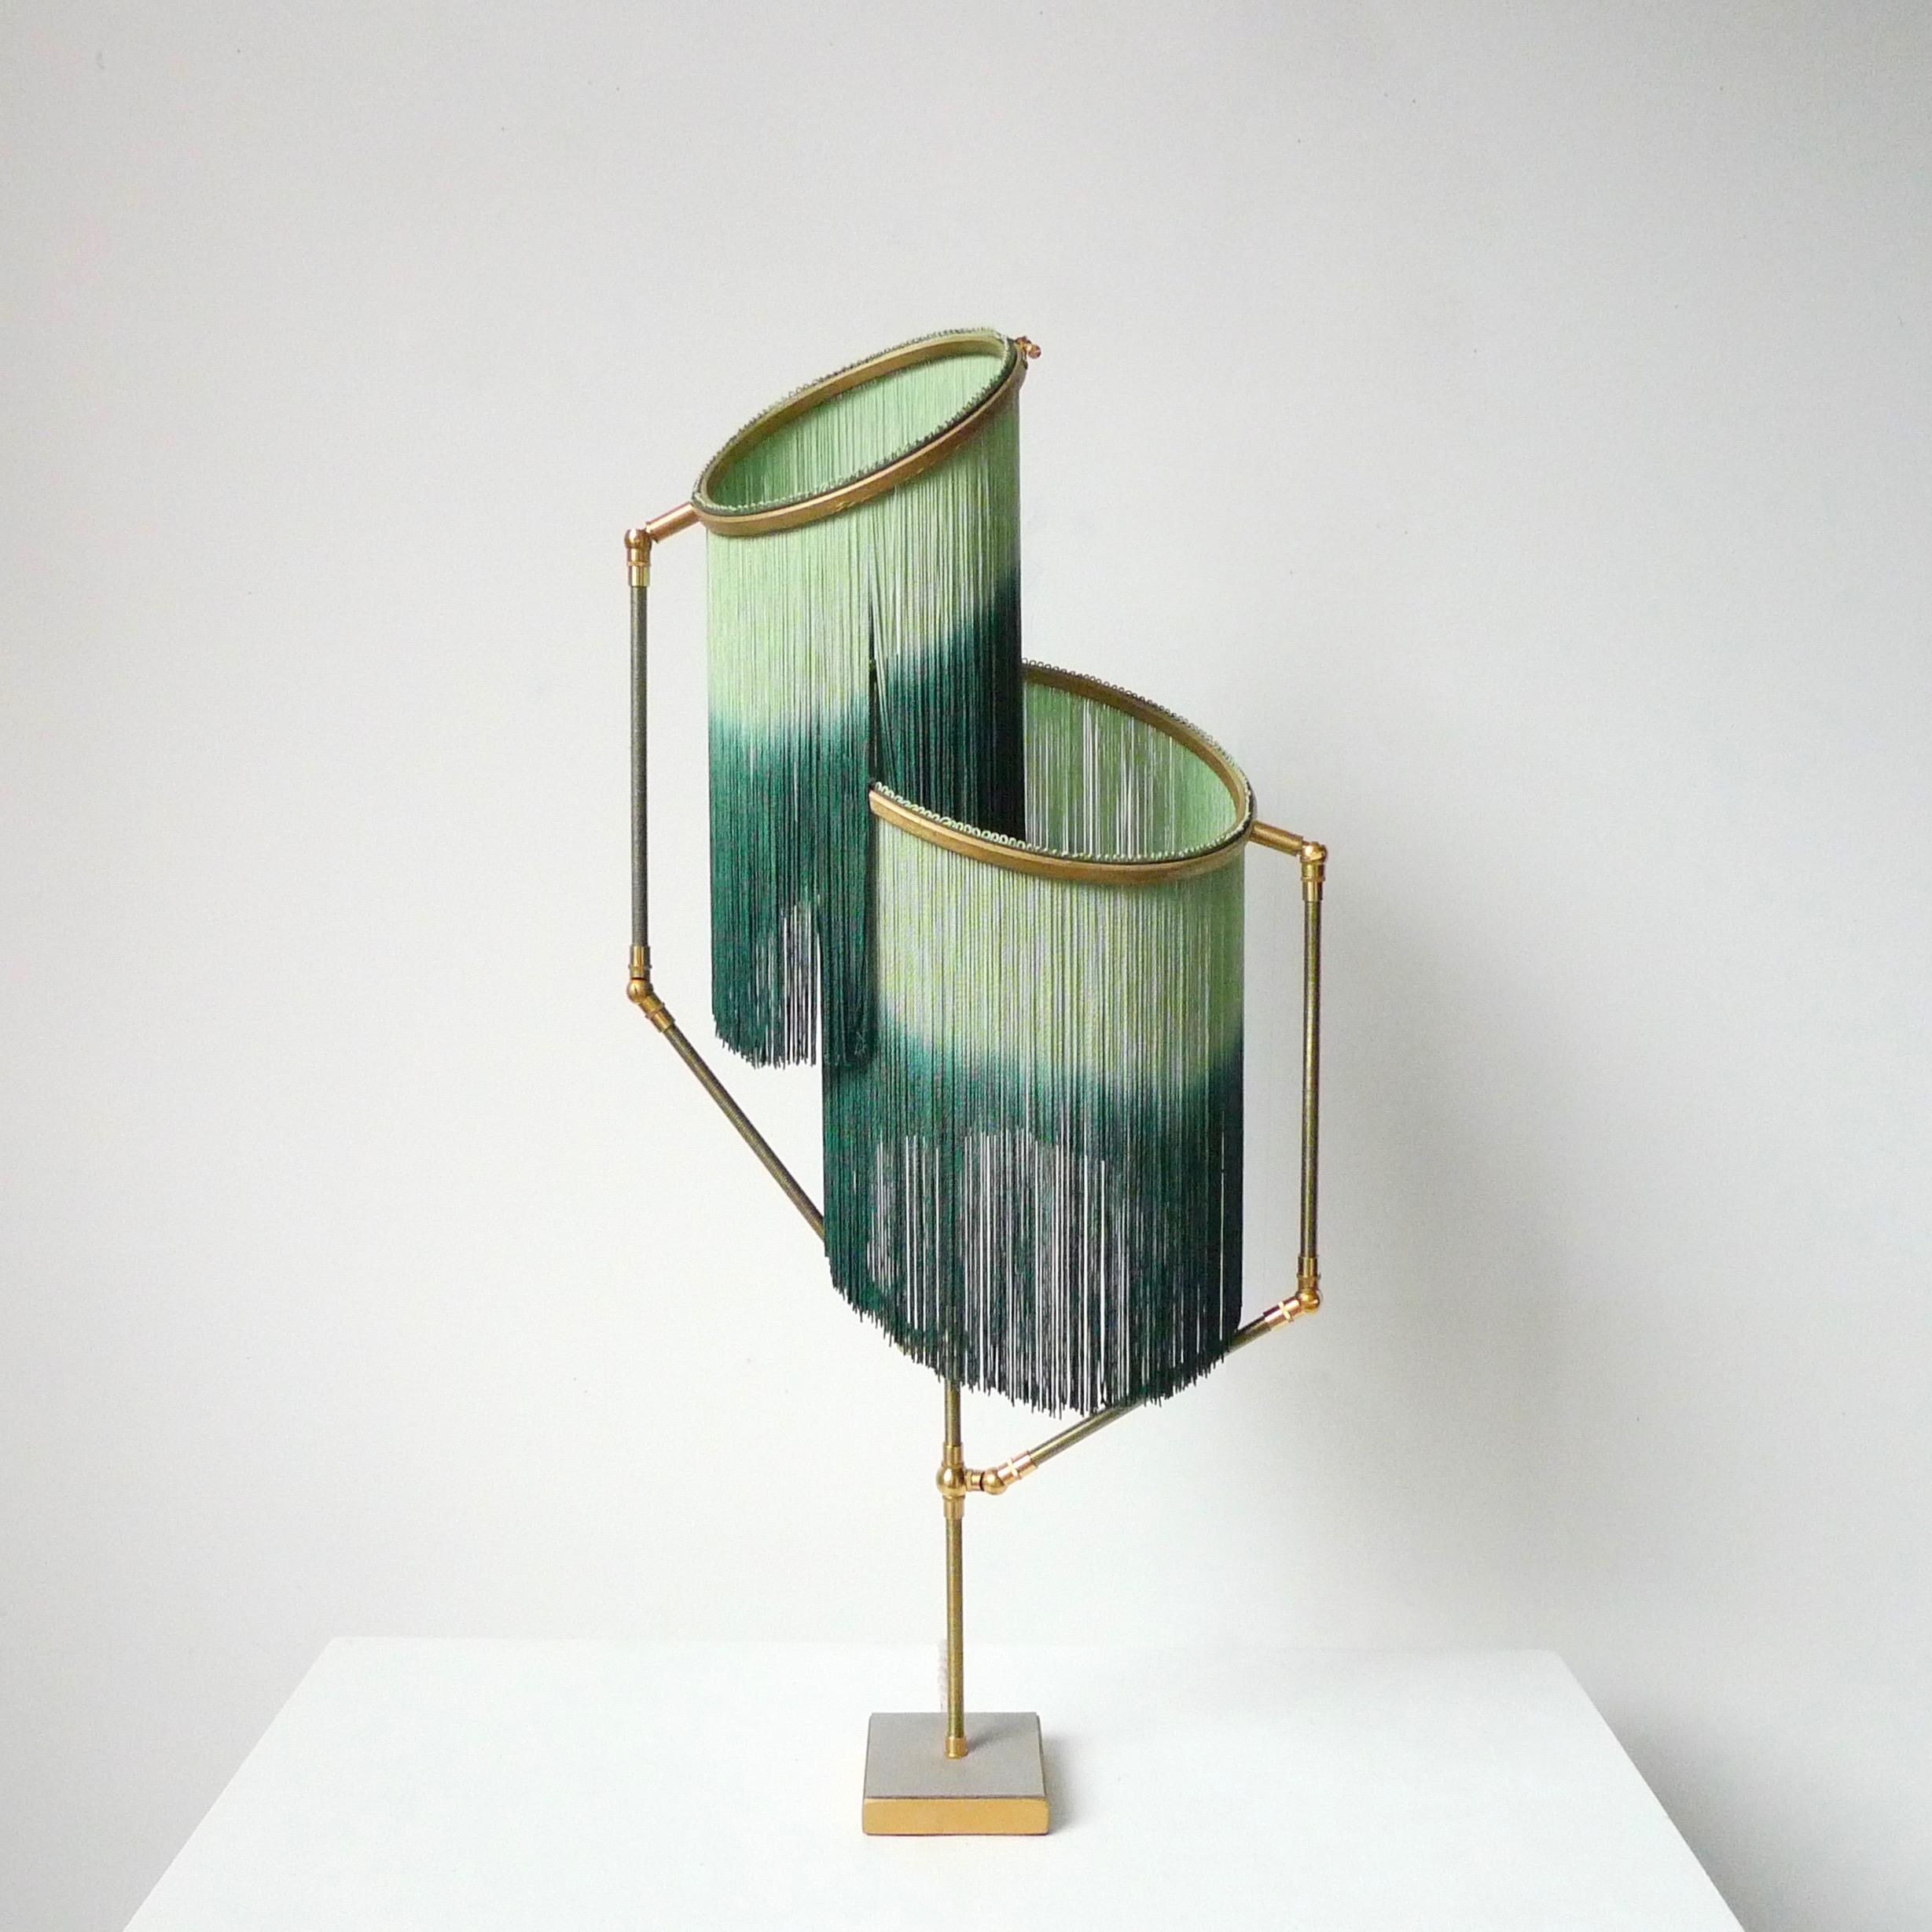 Green charme table lamp, Sander Bottinga

Dimensions: H 73 x W 38 x D 25 cm
Hand-sculpted in brass, leather, wood and dip dyed colored Fringes in viscose.
The movable arms makes it possible to move the circles with fringes in differed